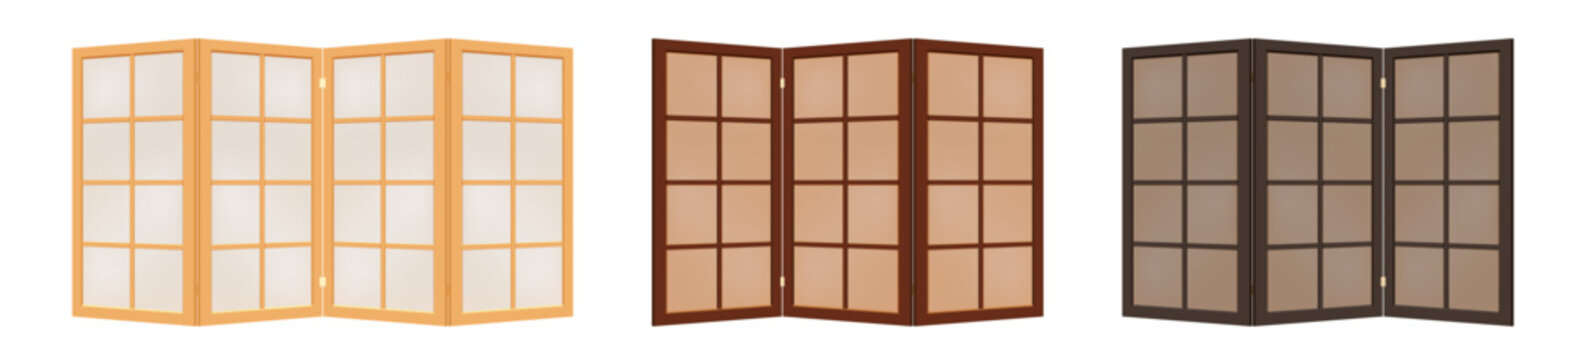 Set of wooden folding screens with frosted glass or paper to divide the room, as a decor. Paravans in asian style